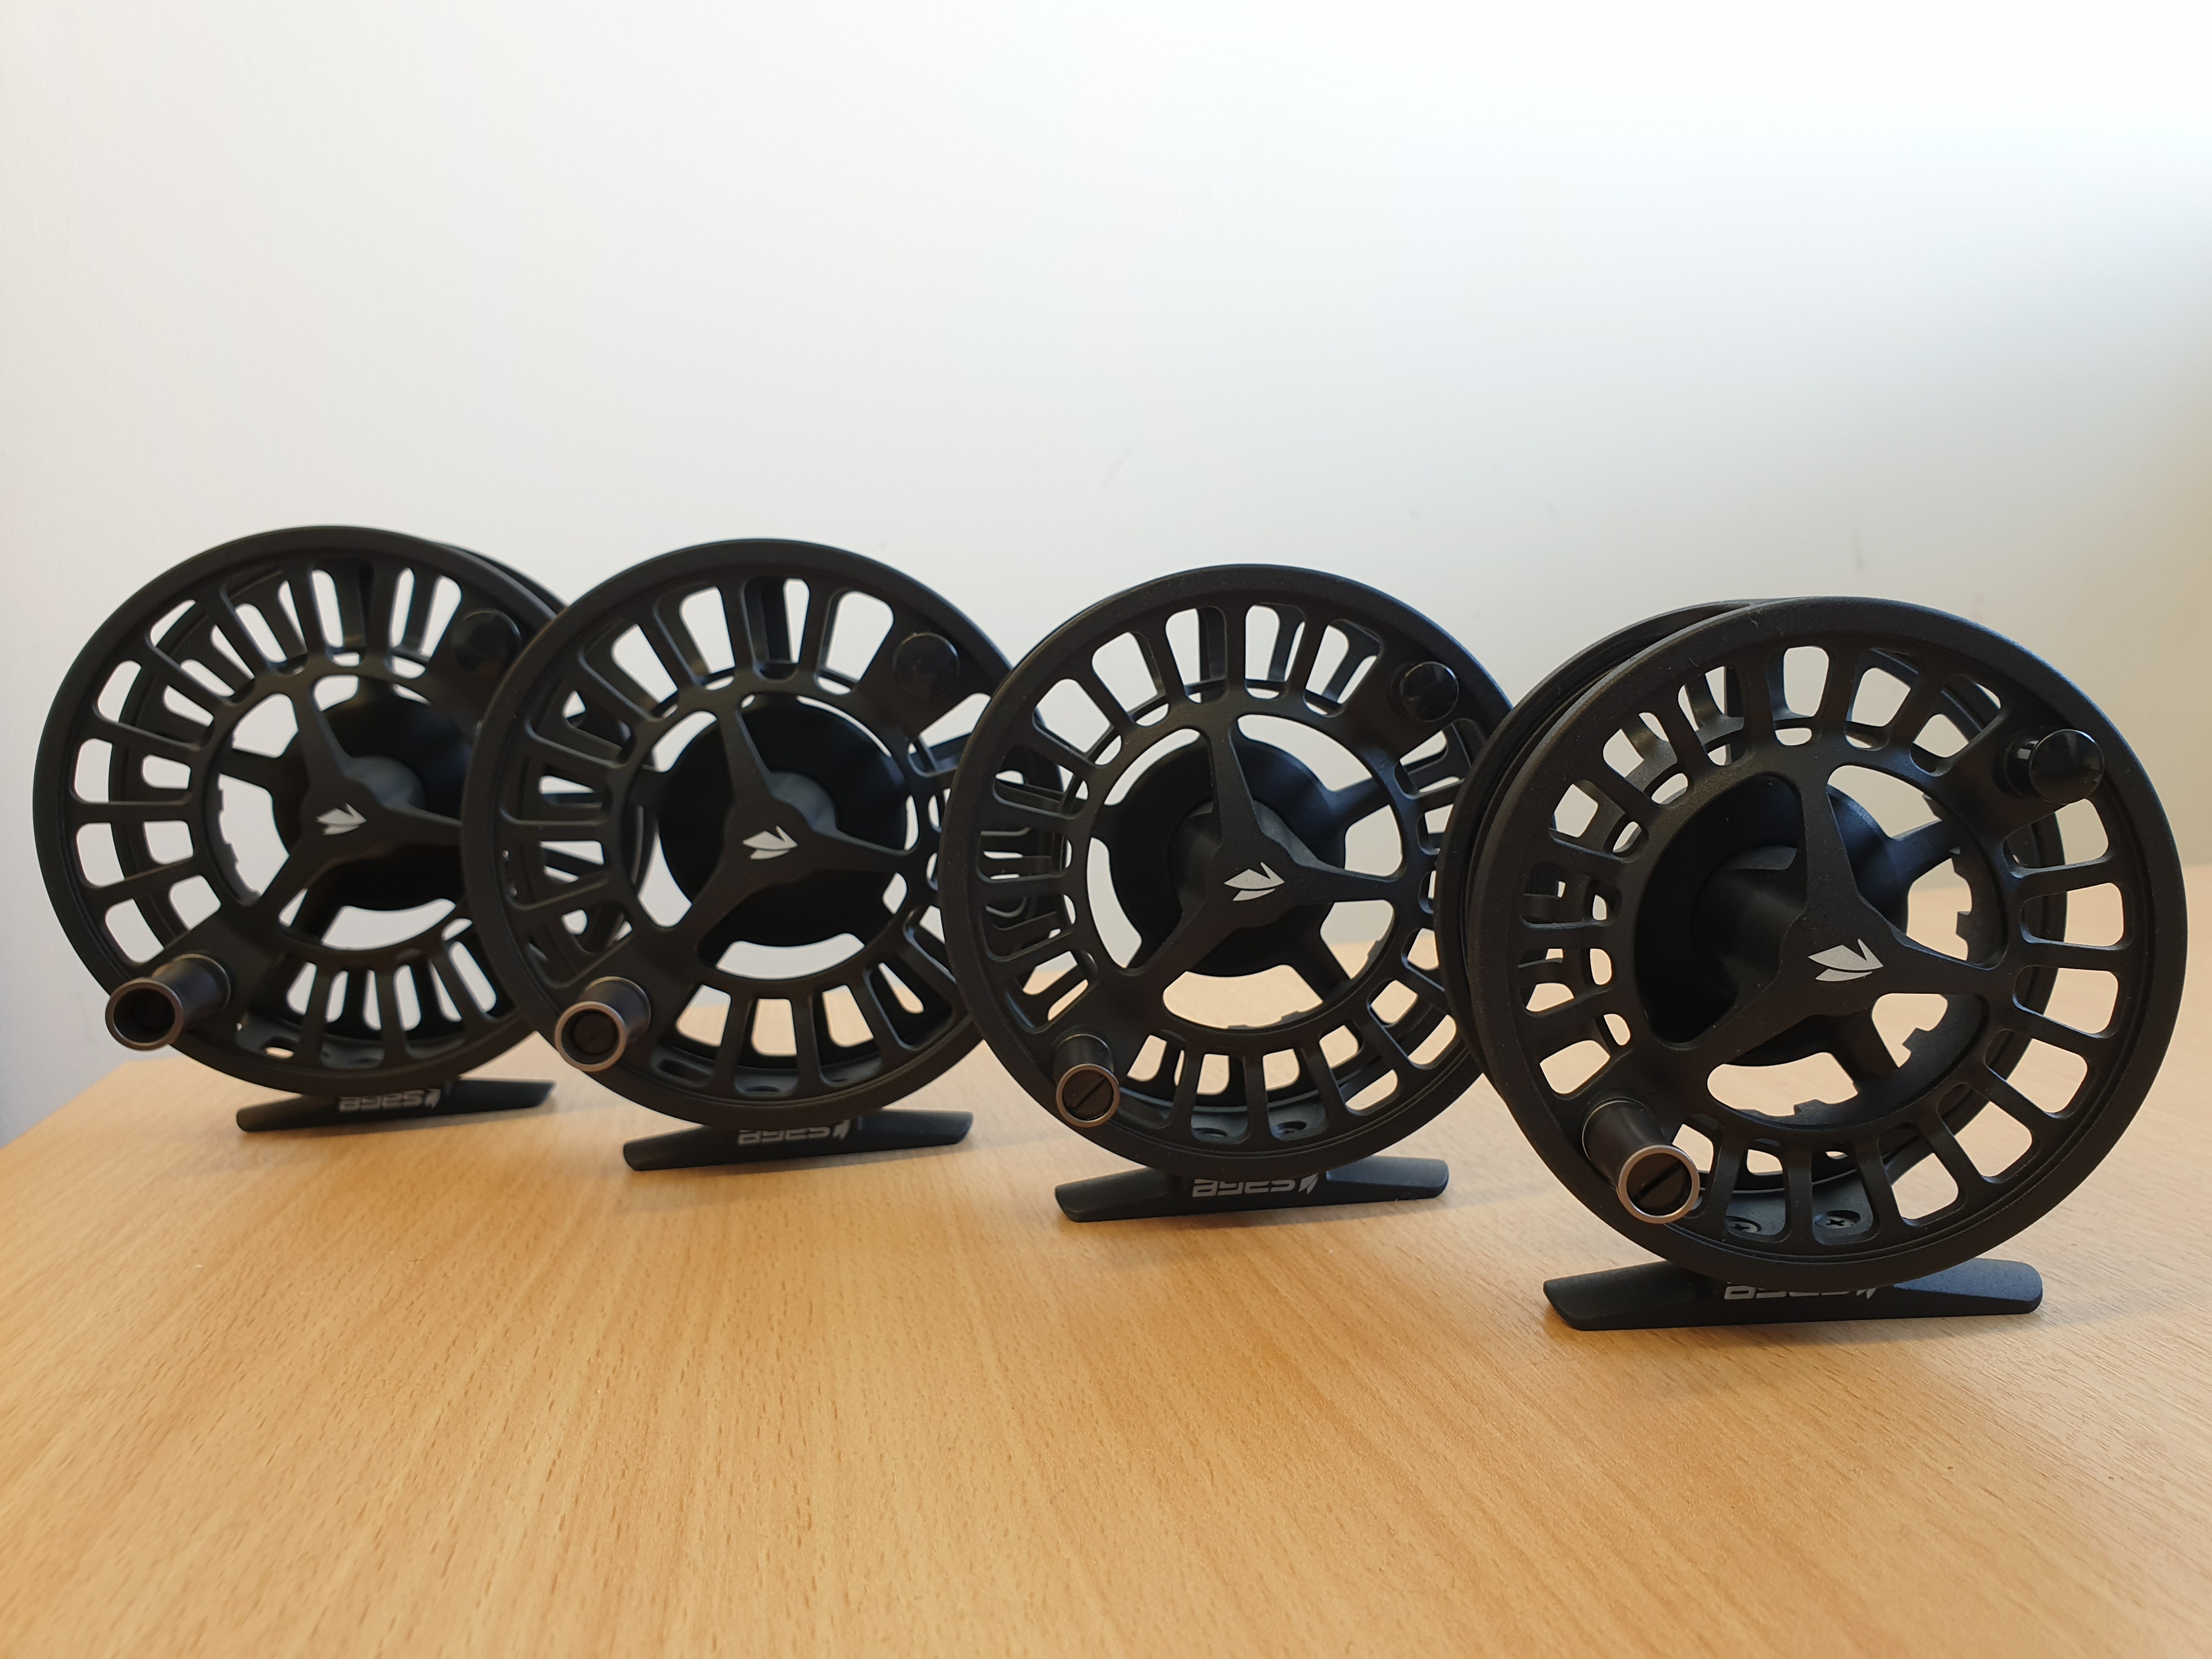 fly reel size